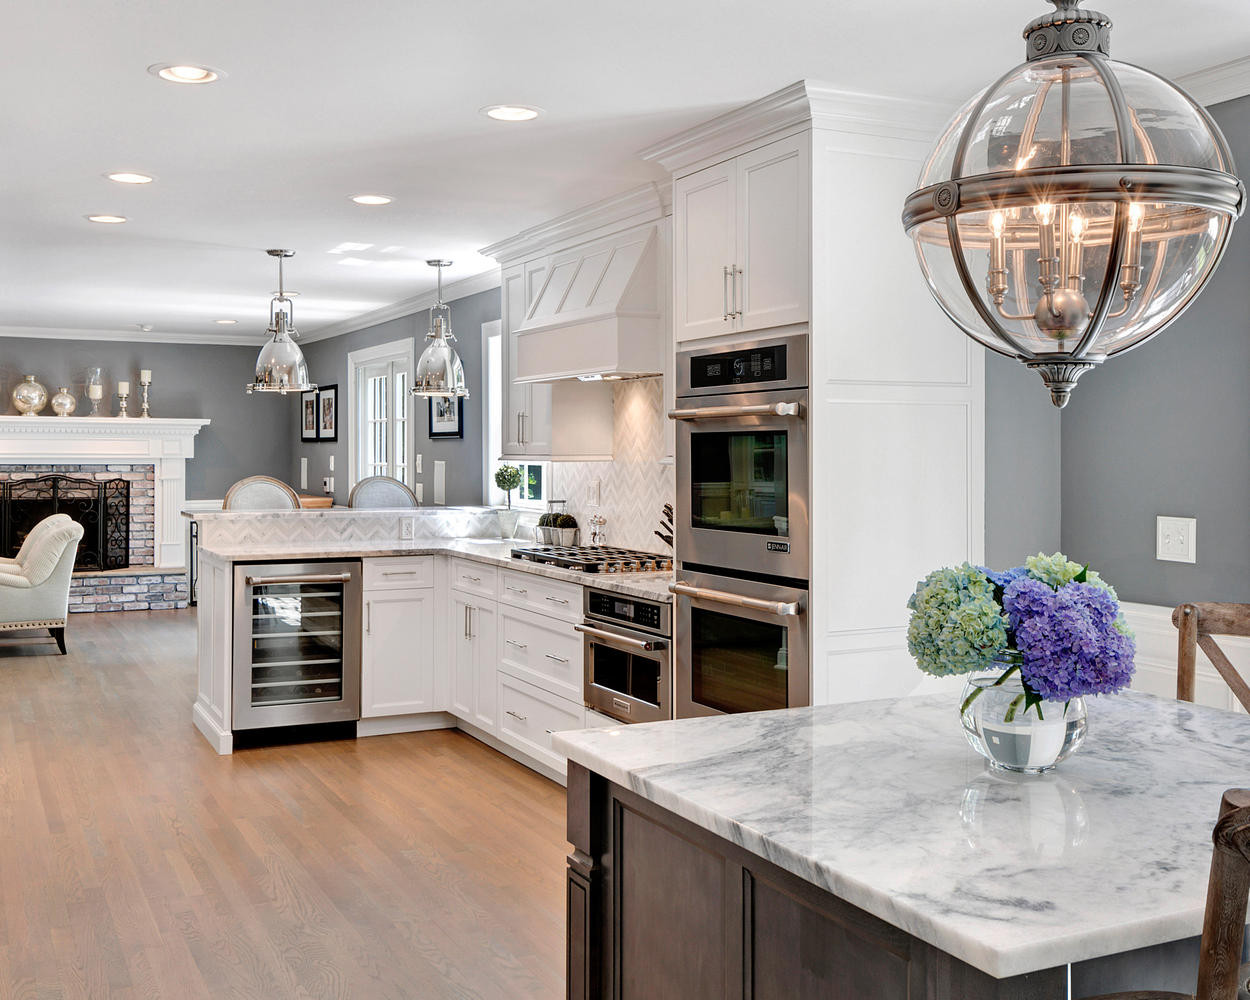 Grey And White Kitchen Photos
 What Should Be Prepared To Build Beautiful White Kitchens